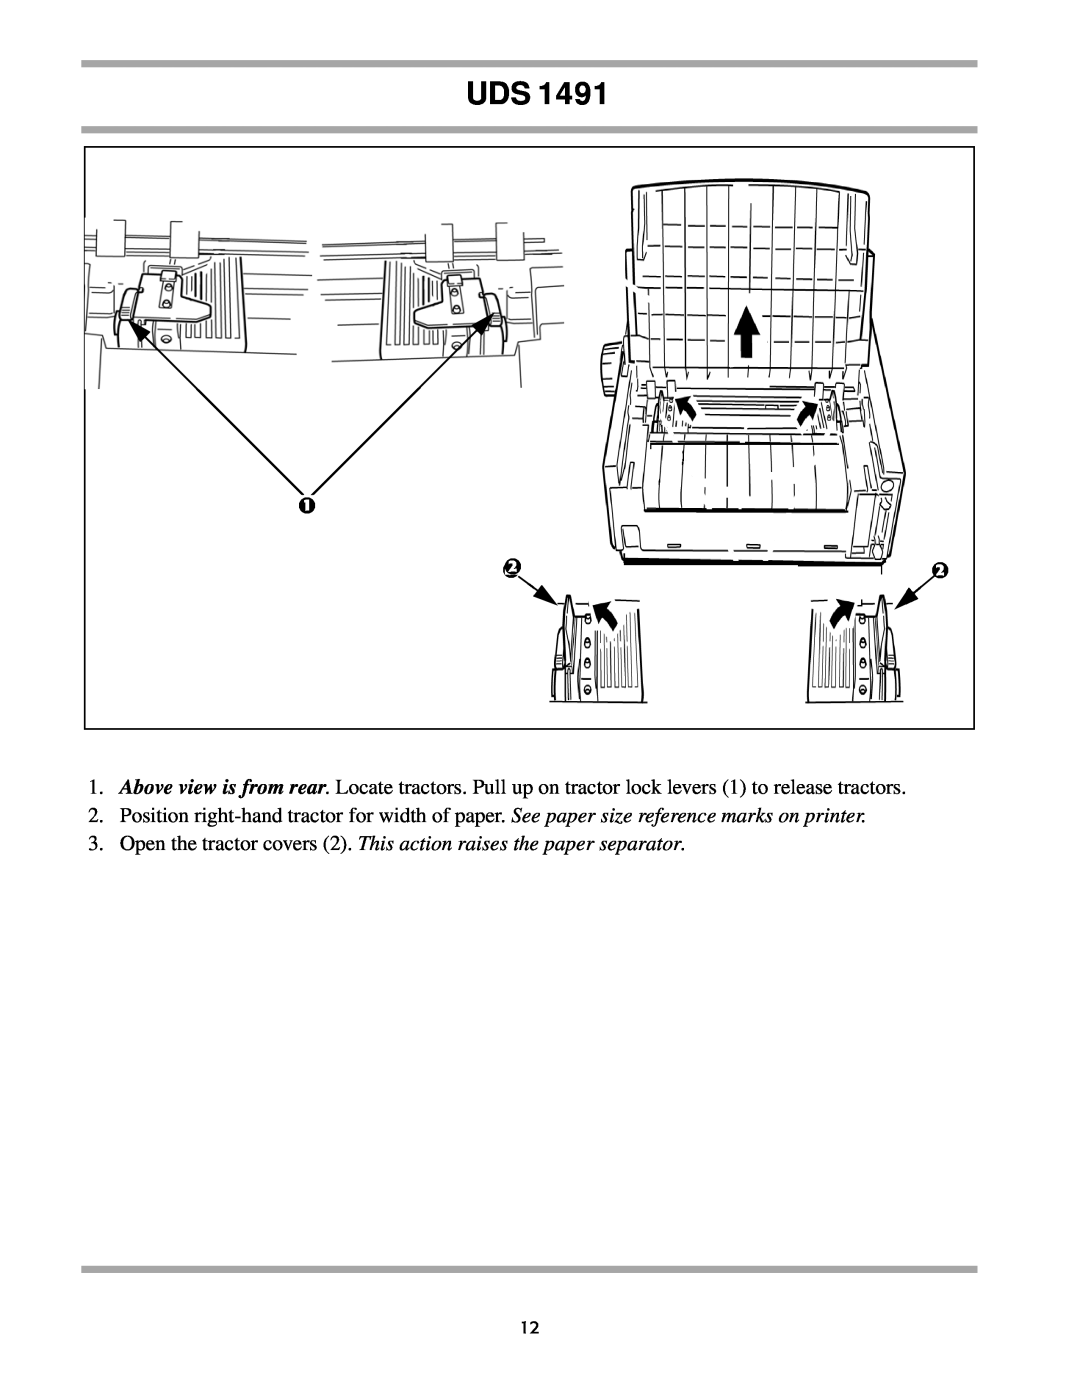 Unisys UDS 1491 setup guide Open the tractor covers 2. This action raises the paper separator 